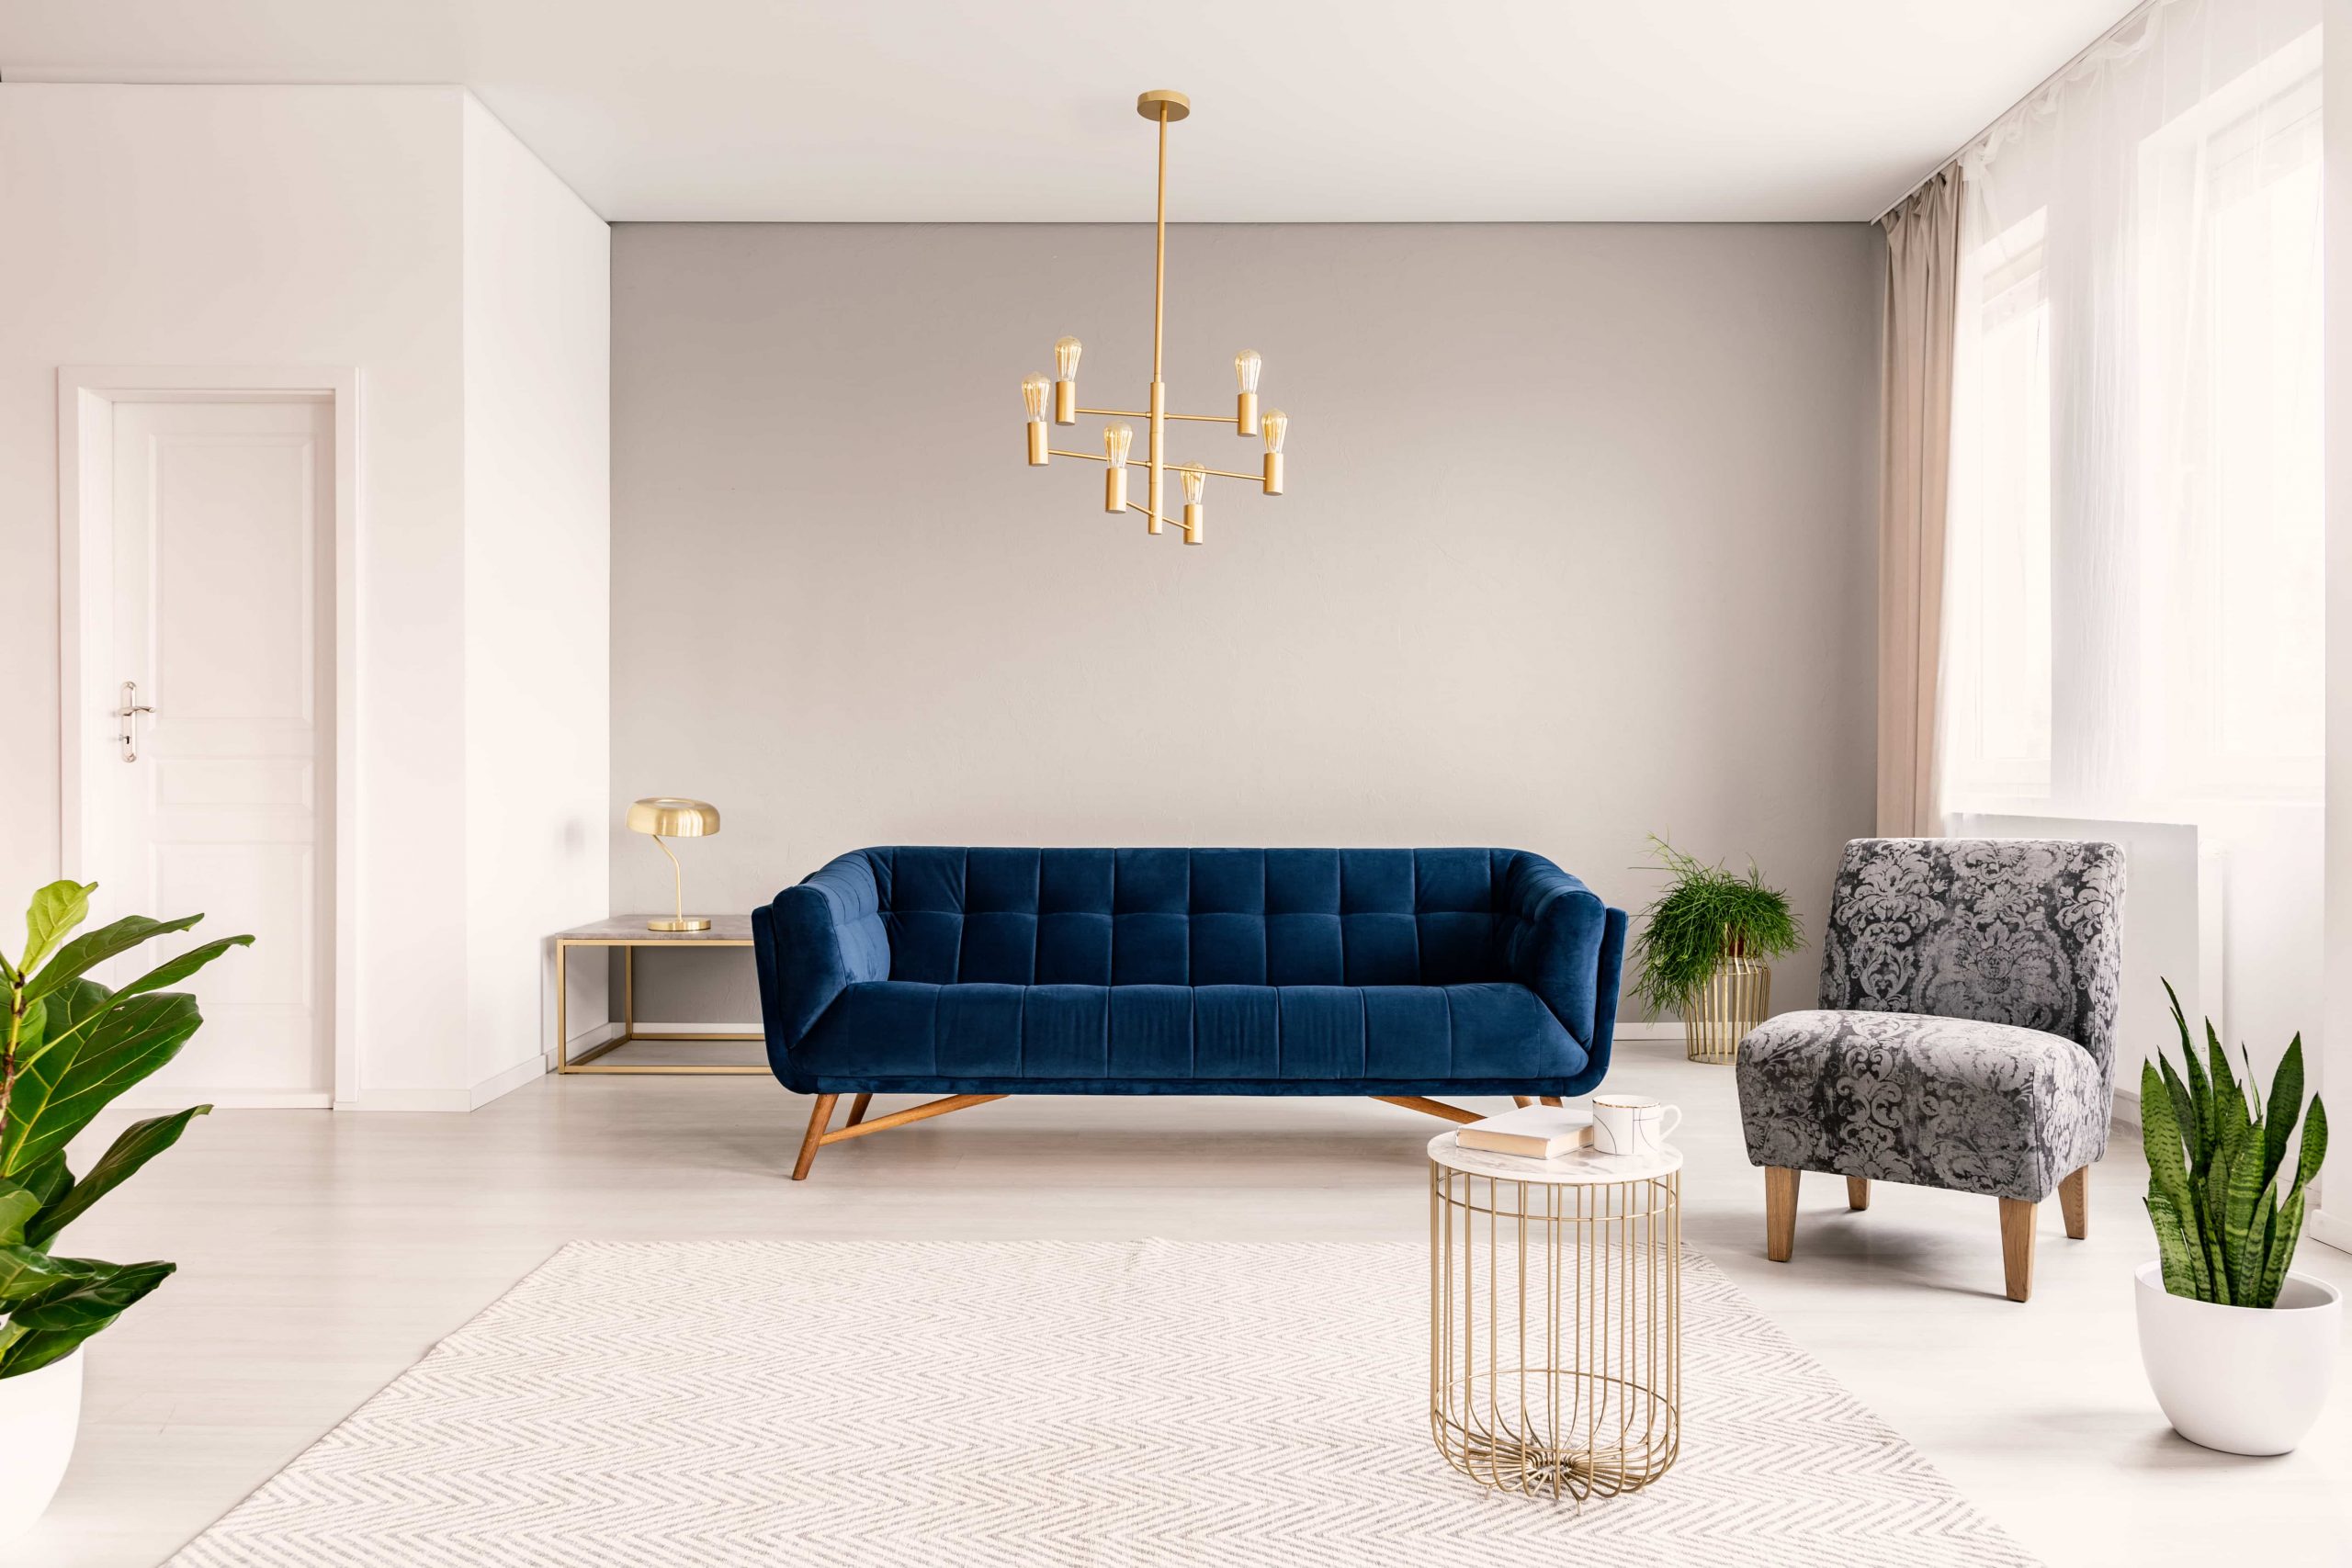  Save Download Preview Copy space living room interior with a dark blue couch, a gray armchair and gold accents.